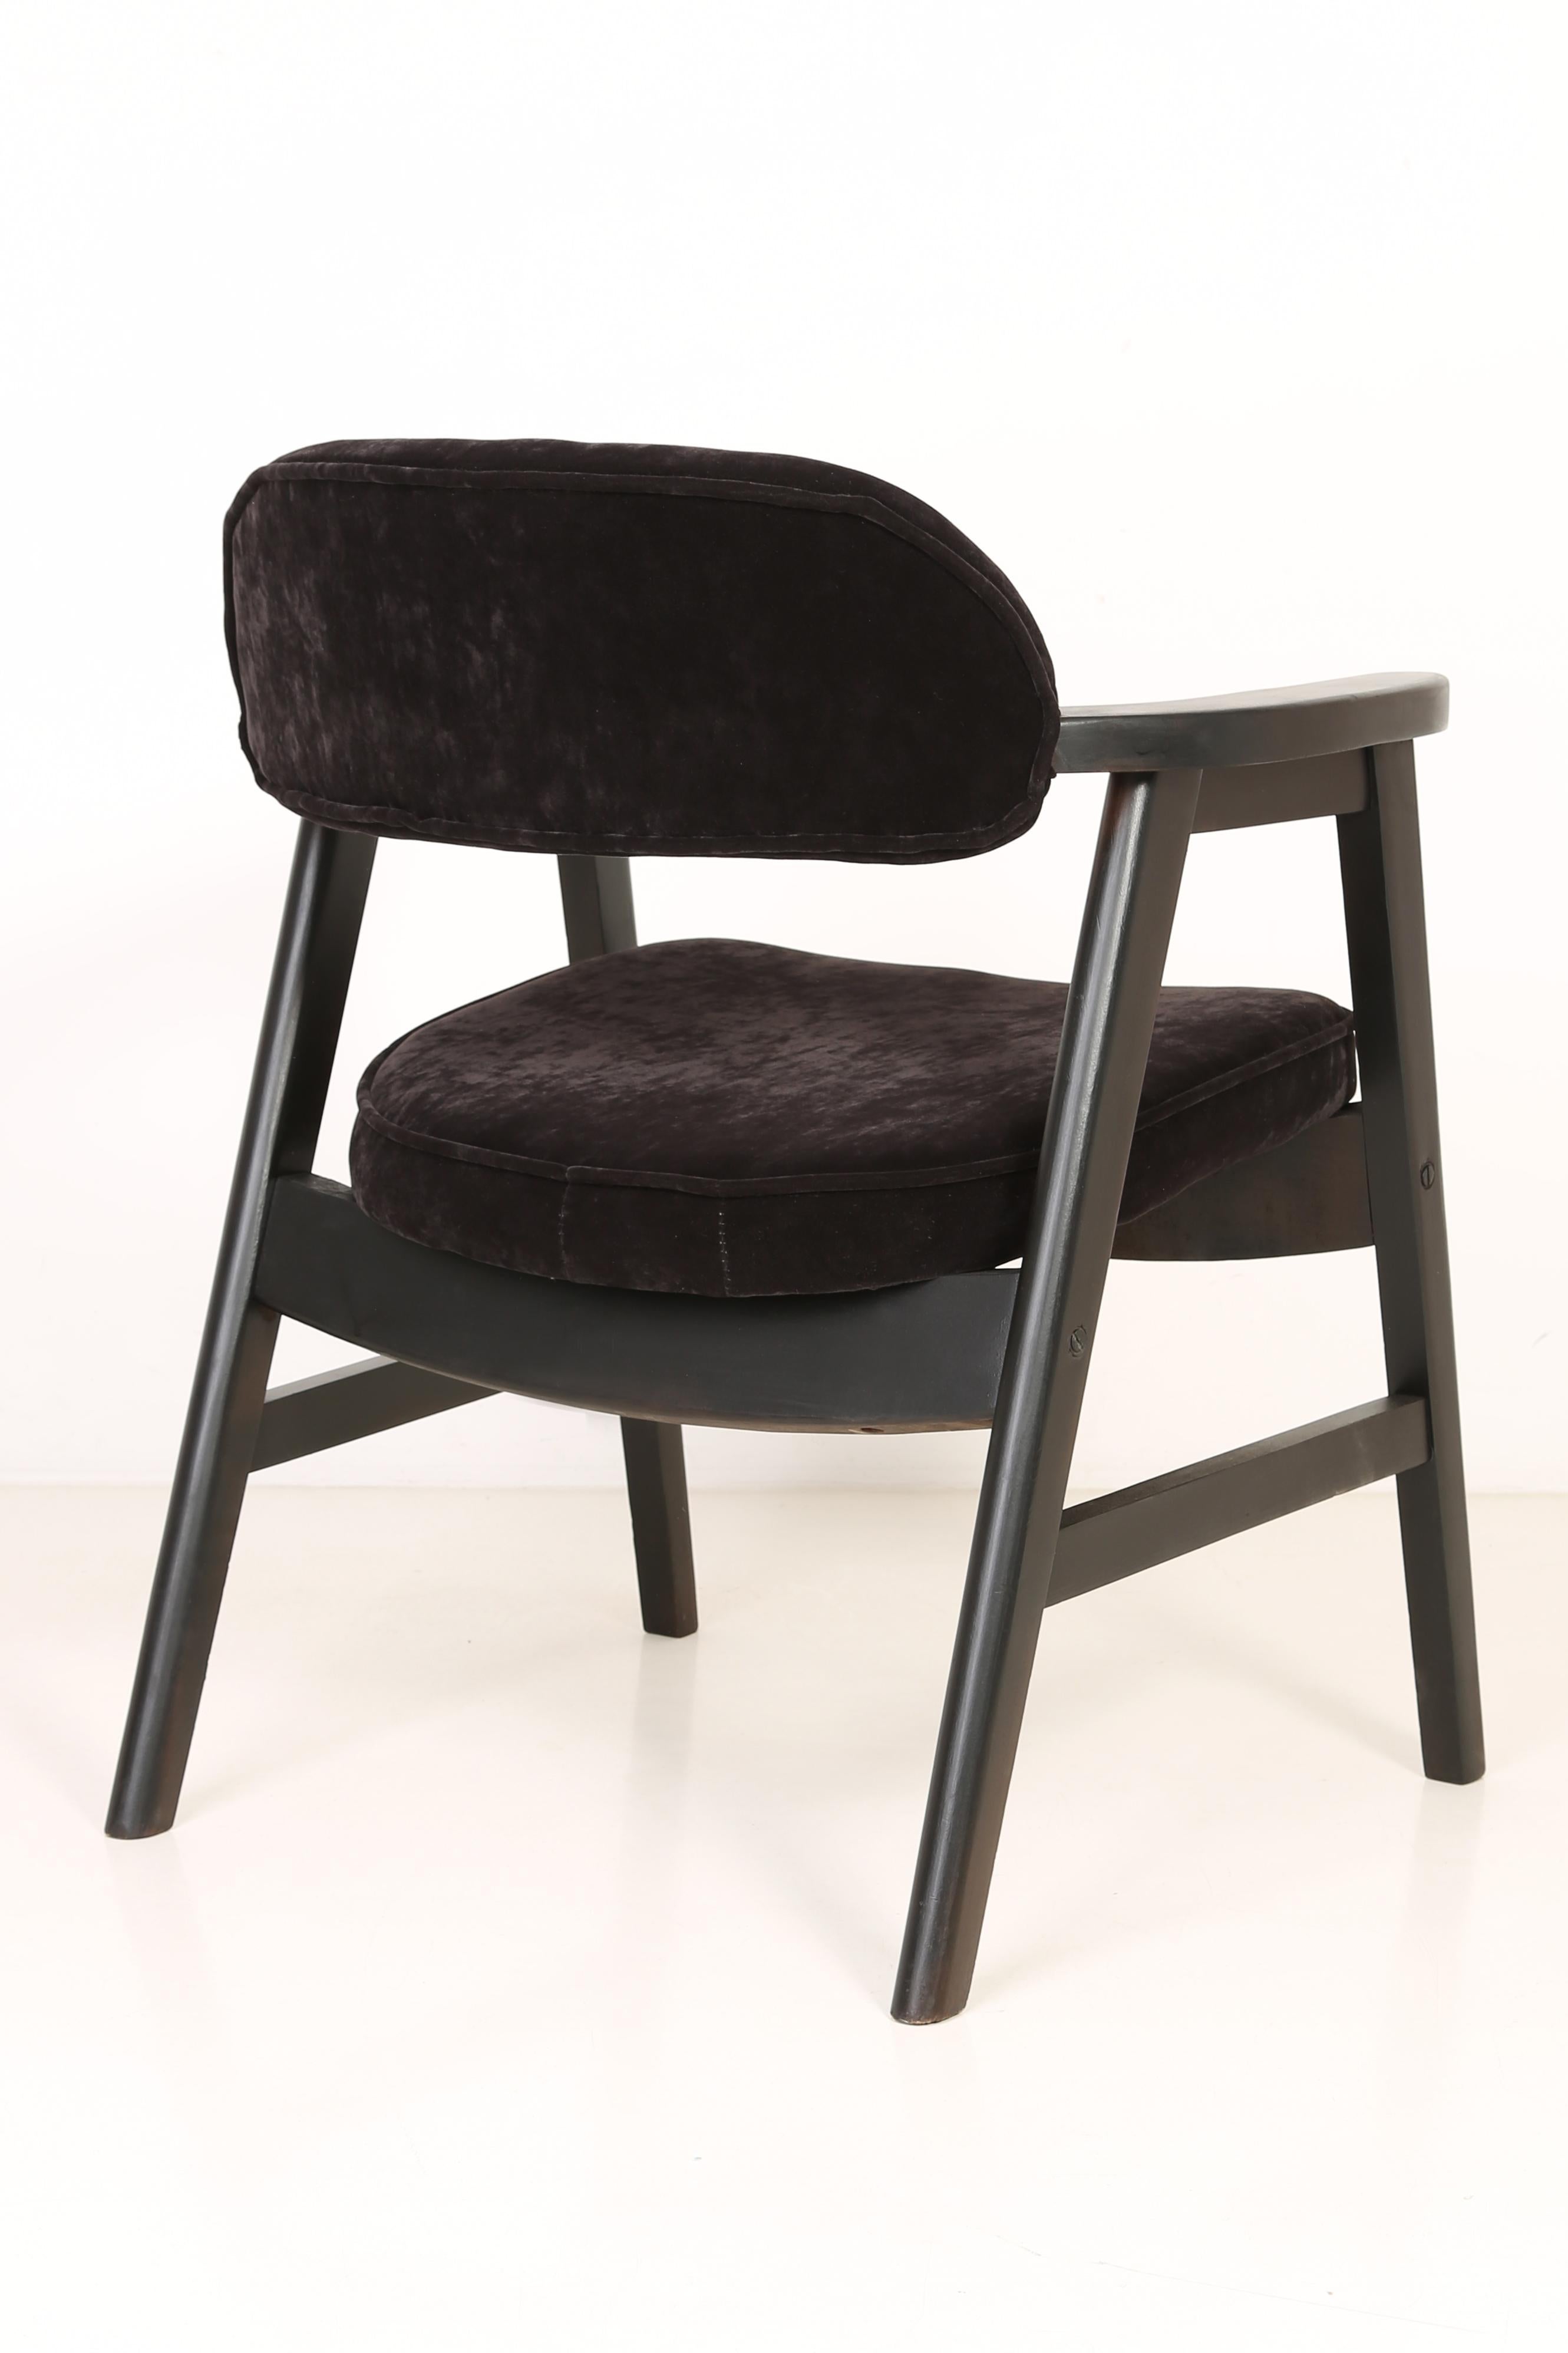 Set of Four 20th Century Buffalo Black Wood and Velvet Chairs, 1960s For Sale 6